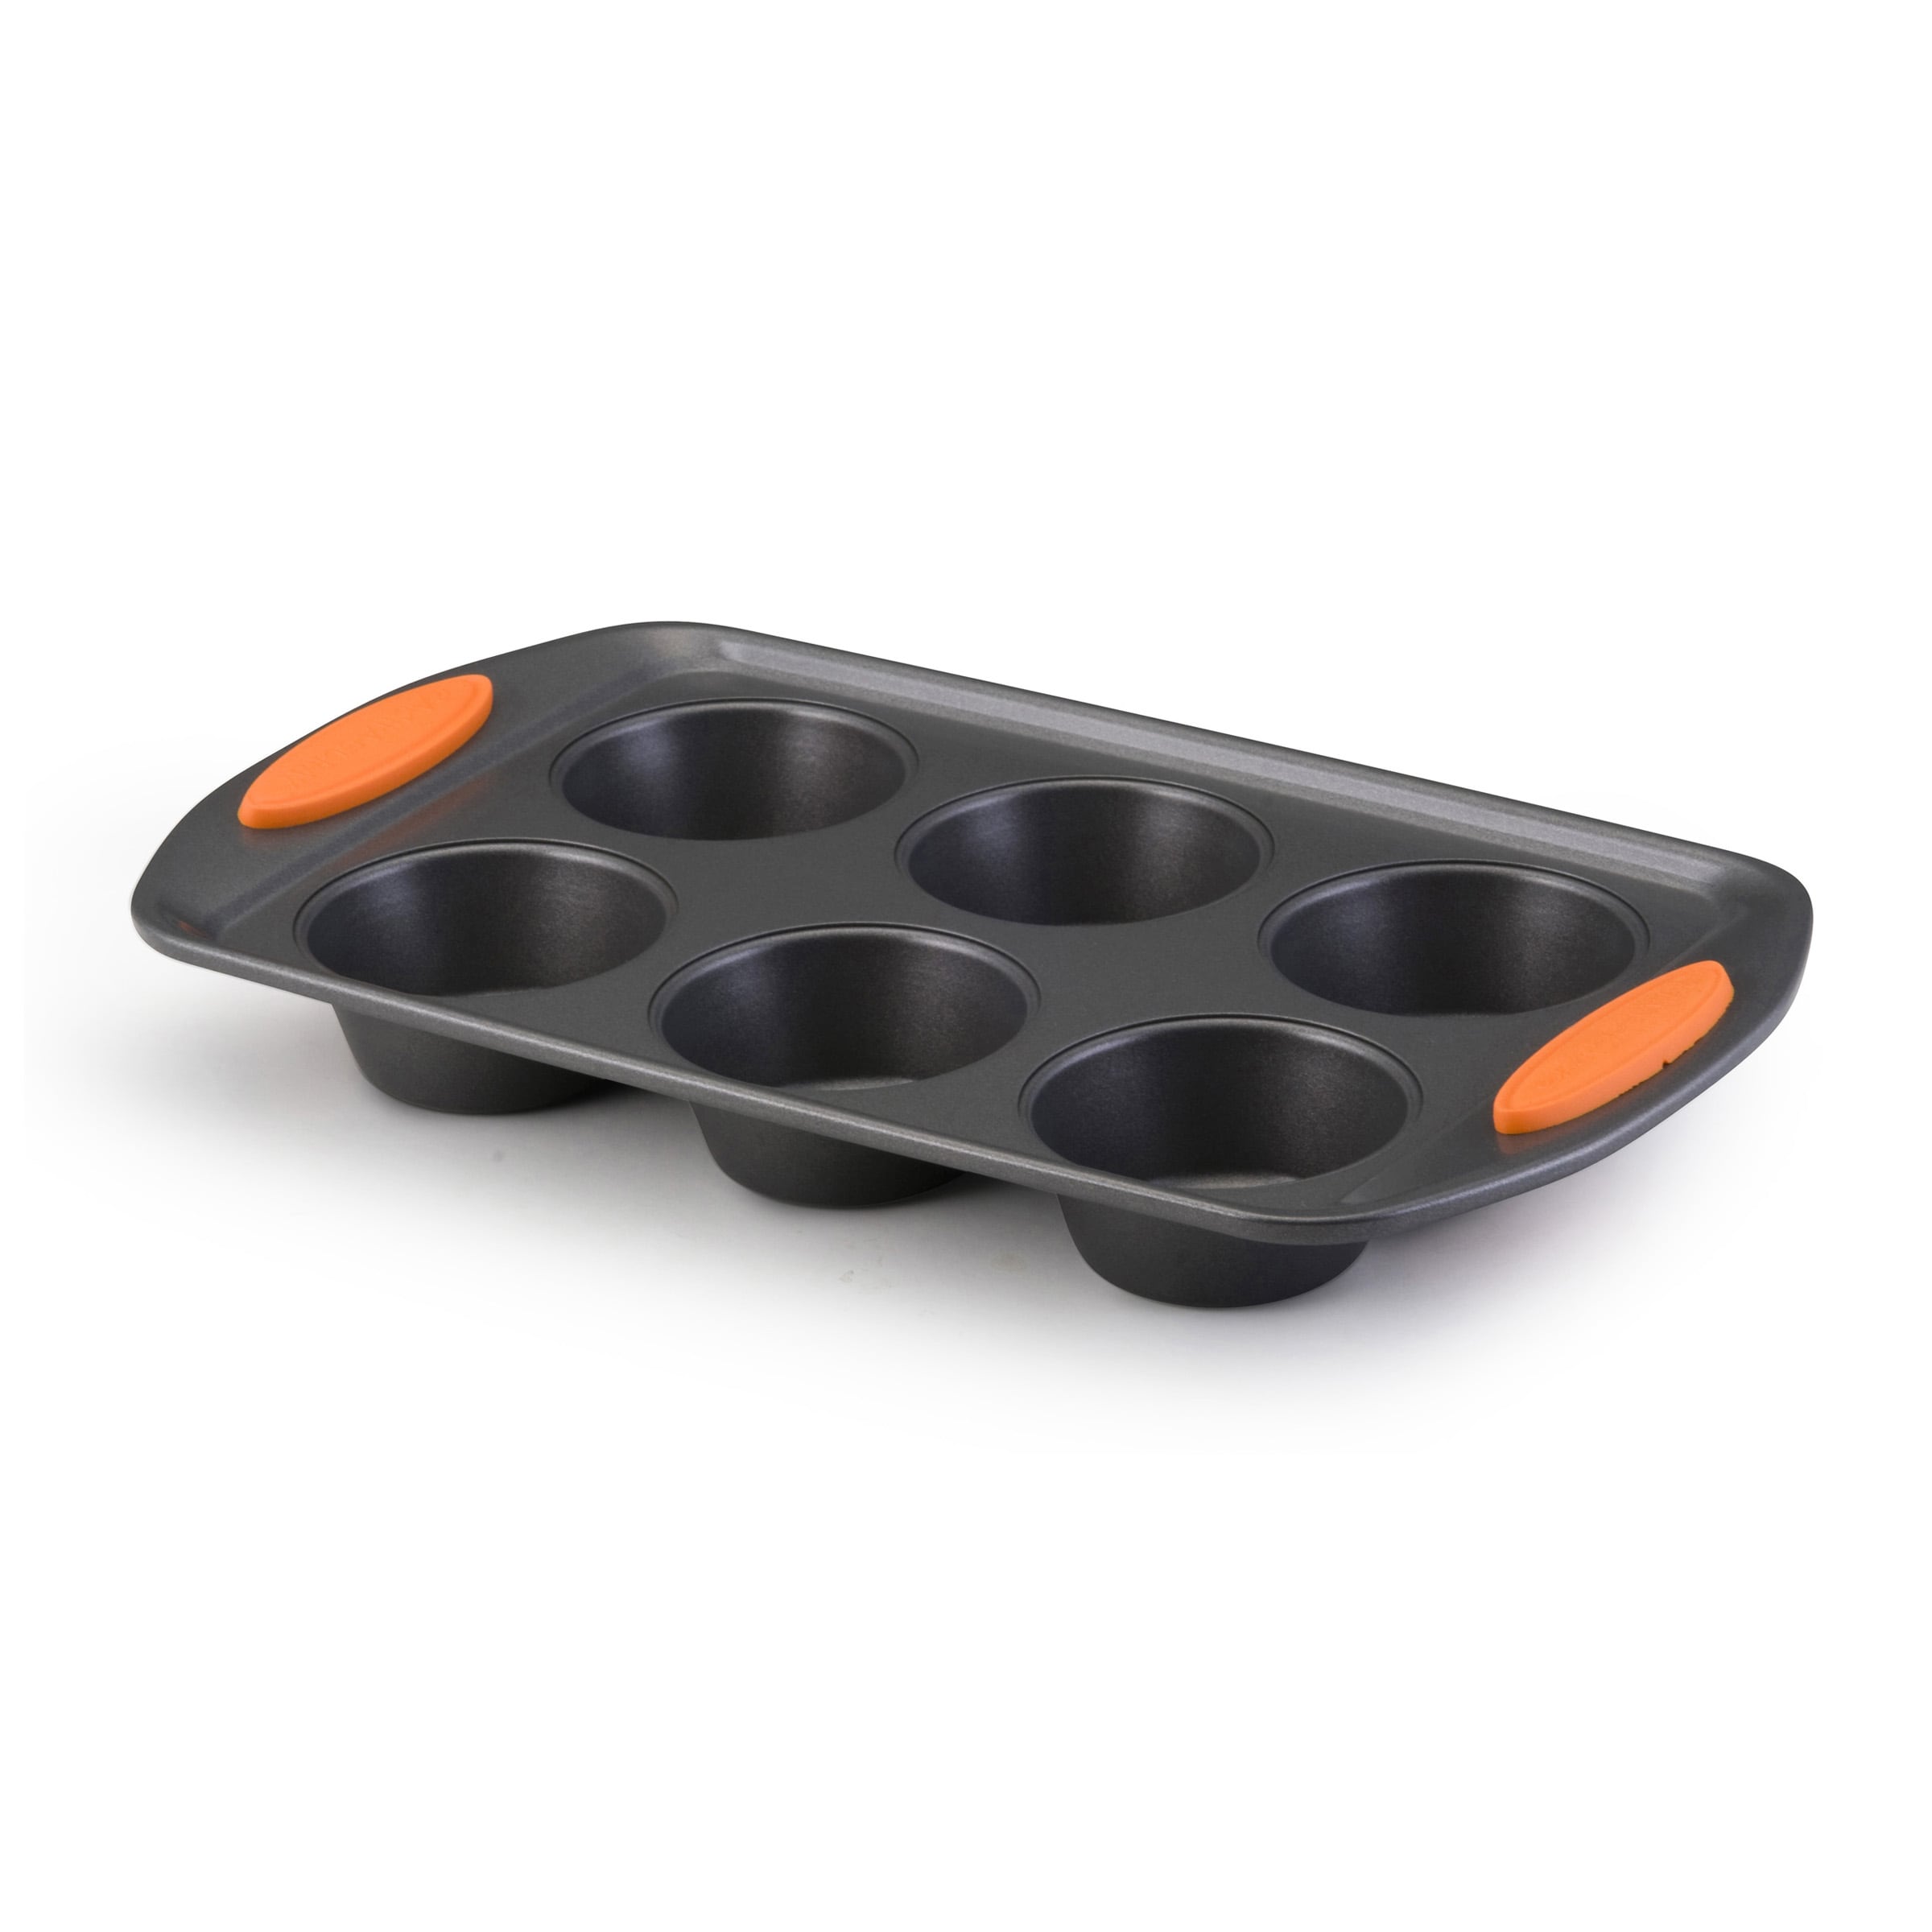 https://ak1.ostkcdn.com/images/products/7468673/7468673/Rachael-Ray-6-cup-Muffin-Pan-L14916473.jpg